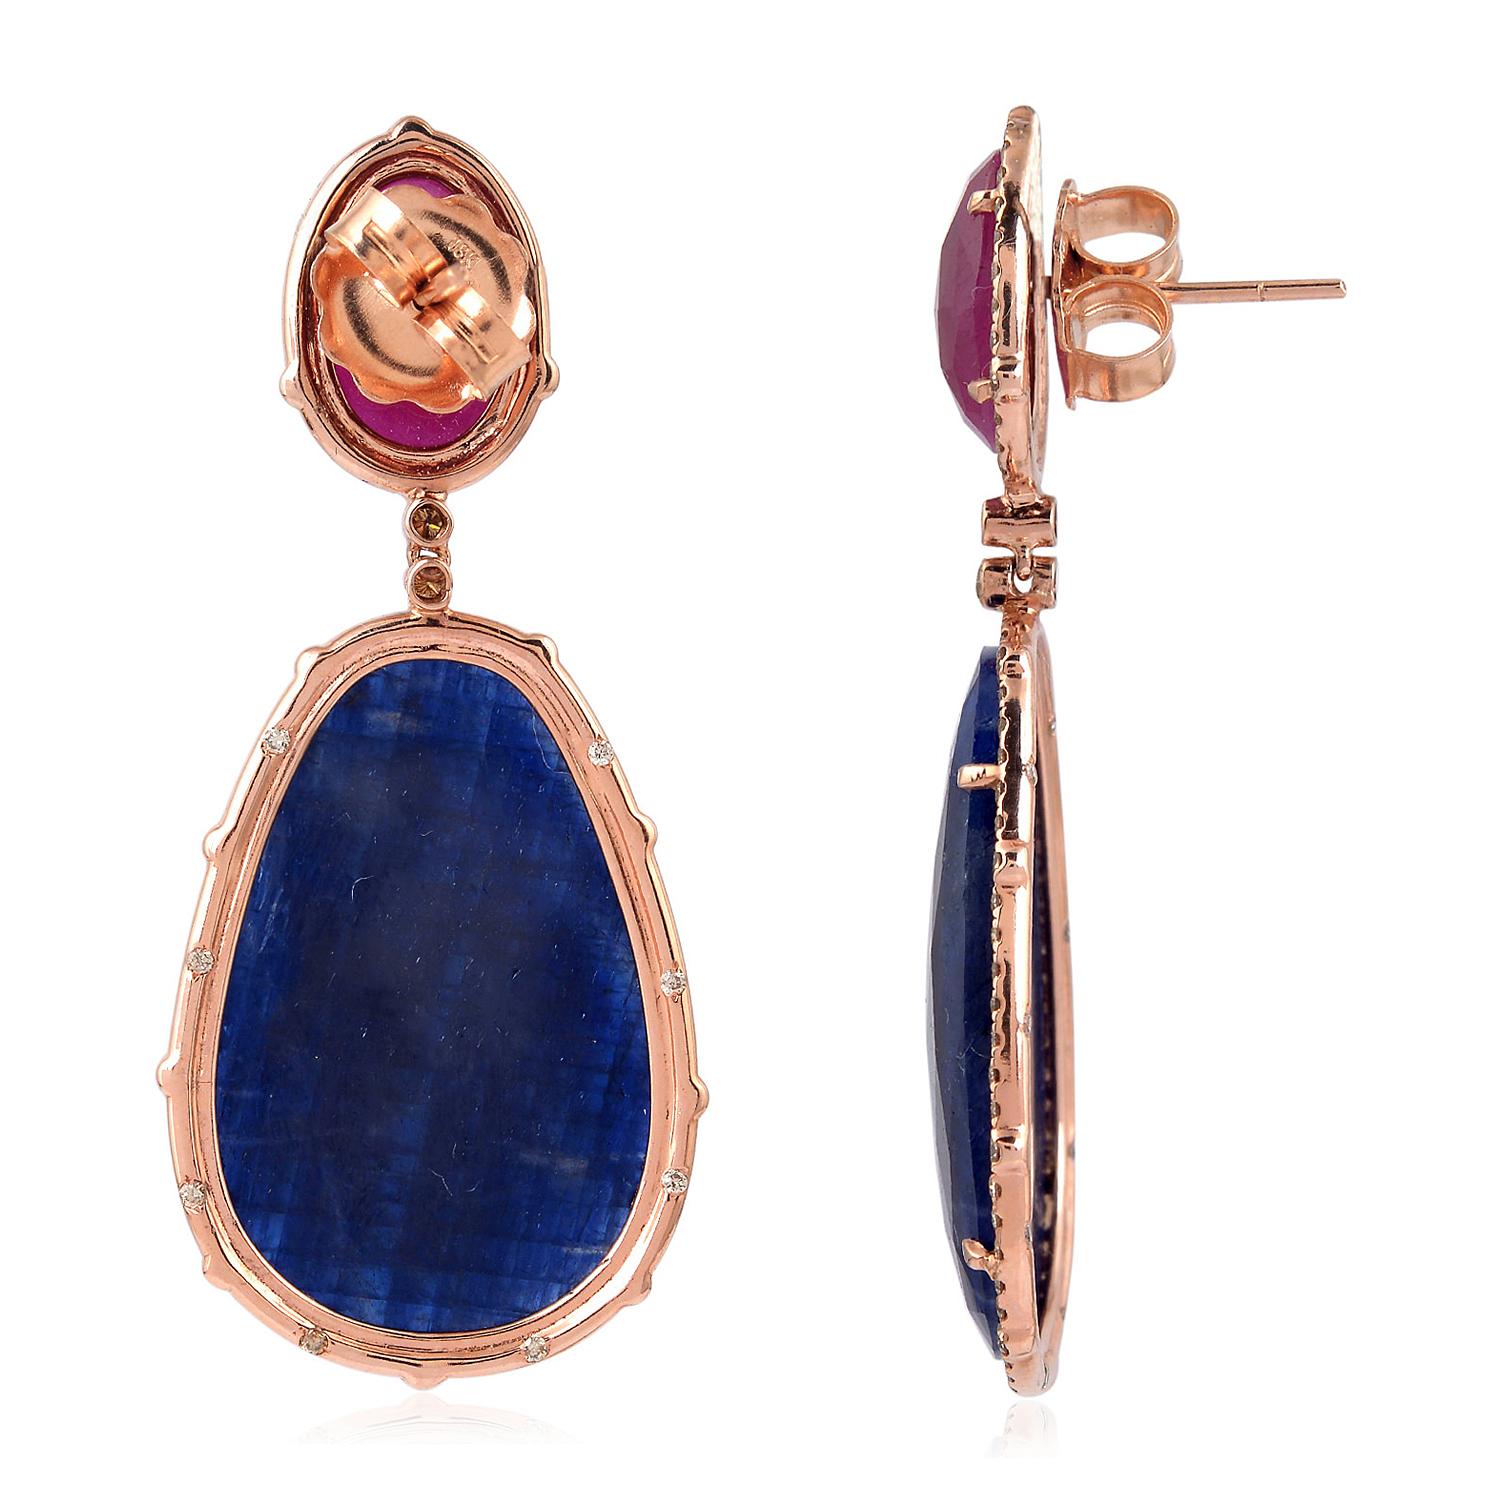 Gorgeous looking this two-tone Sliced Ruby and Sapphire Earring set it 18K Gold with diamonds is simply stunning.

Closure: Push Post

18kt Gold: 7.132gms
Diamond: 1.69cts
Ruby: 7.00cts
Sapphire: 47.8cts
